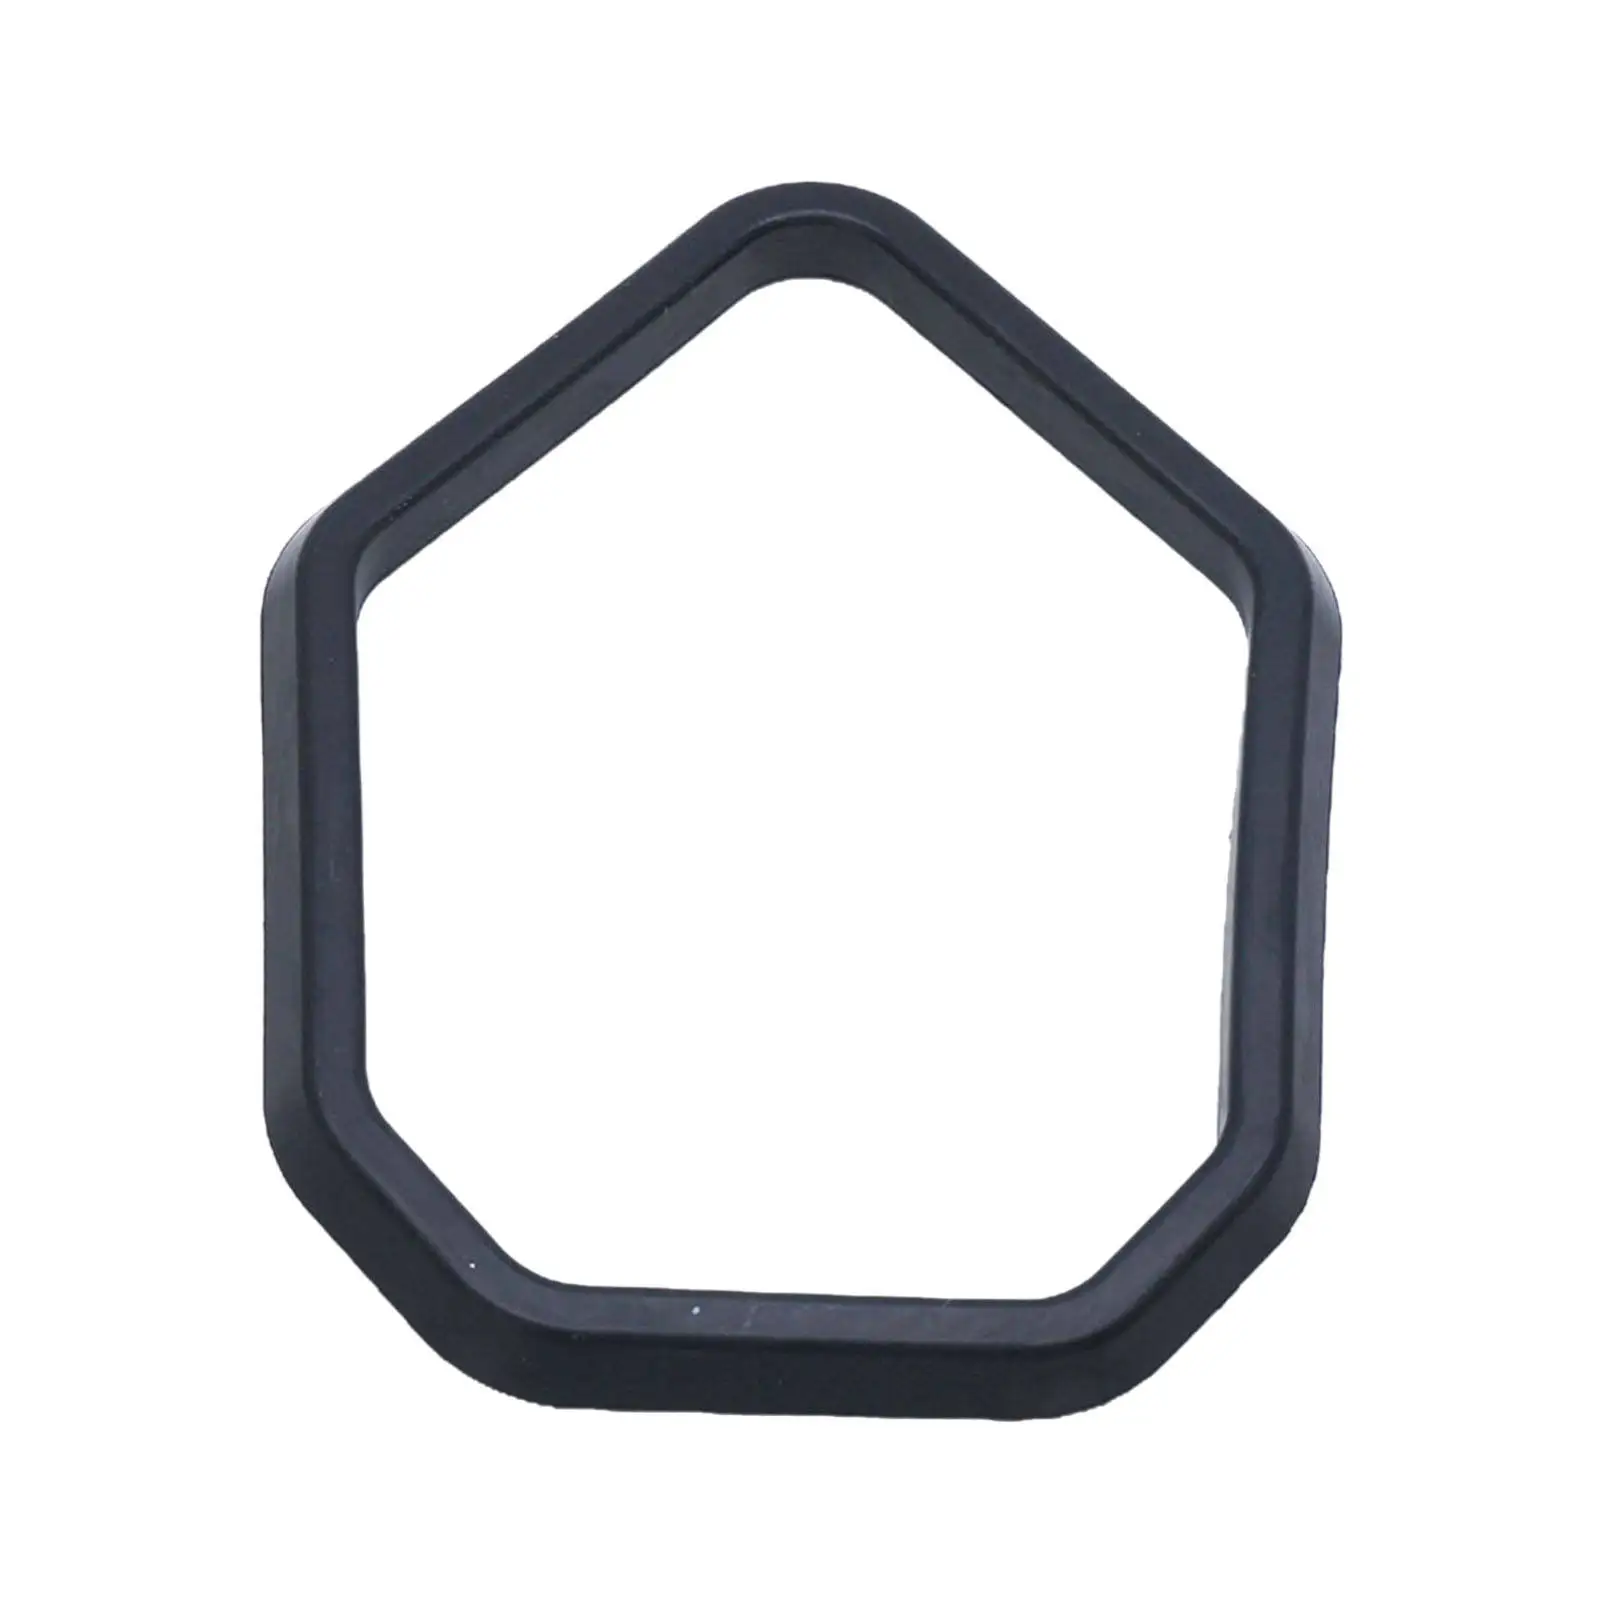 

6E5-45123 Muffler Gasket Replacement Fits For Yamaha Outboard Motor 115HP-250HP 6E5-45123-00, Perfect replacement